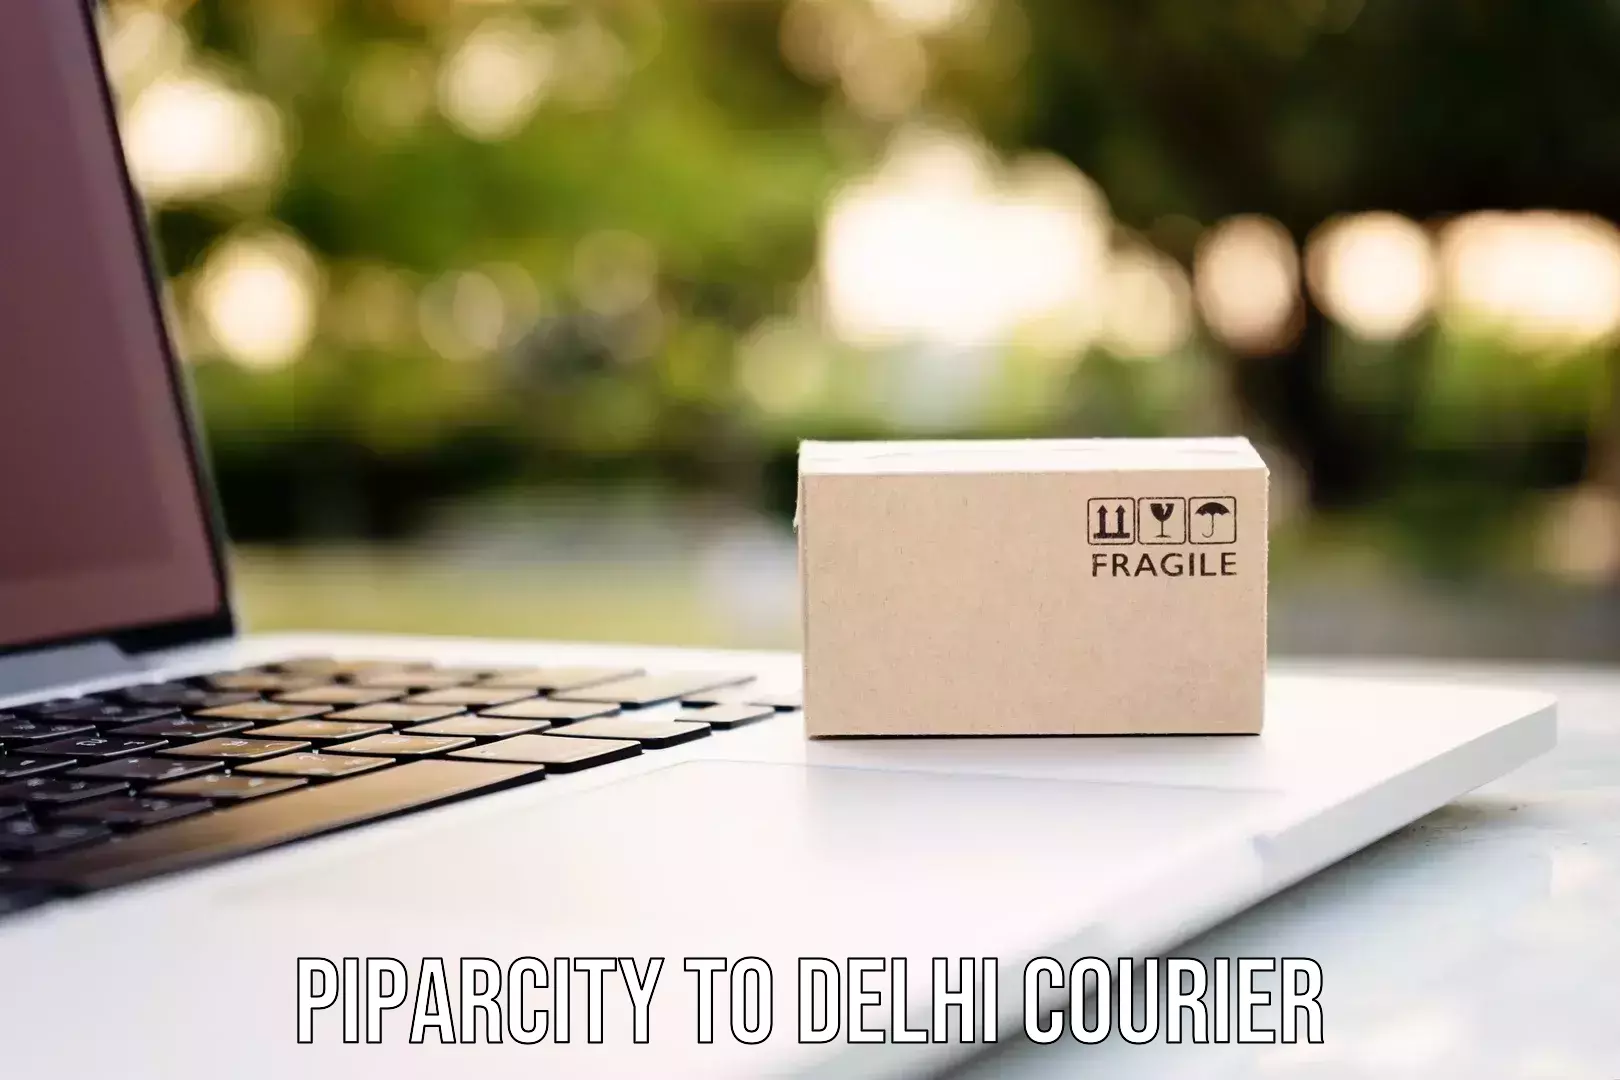 Advanced tracking systems Piparcity to University of Delhi